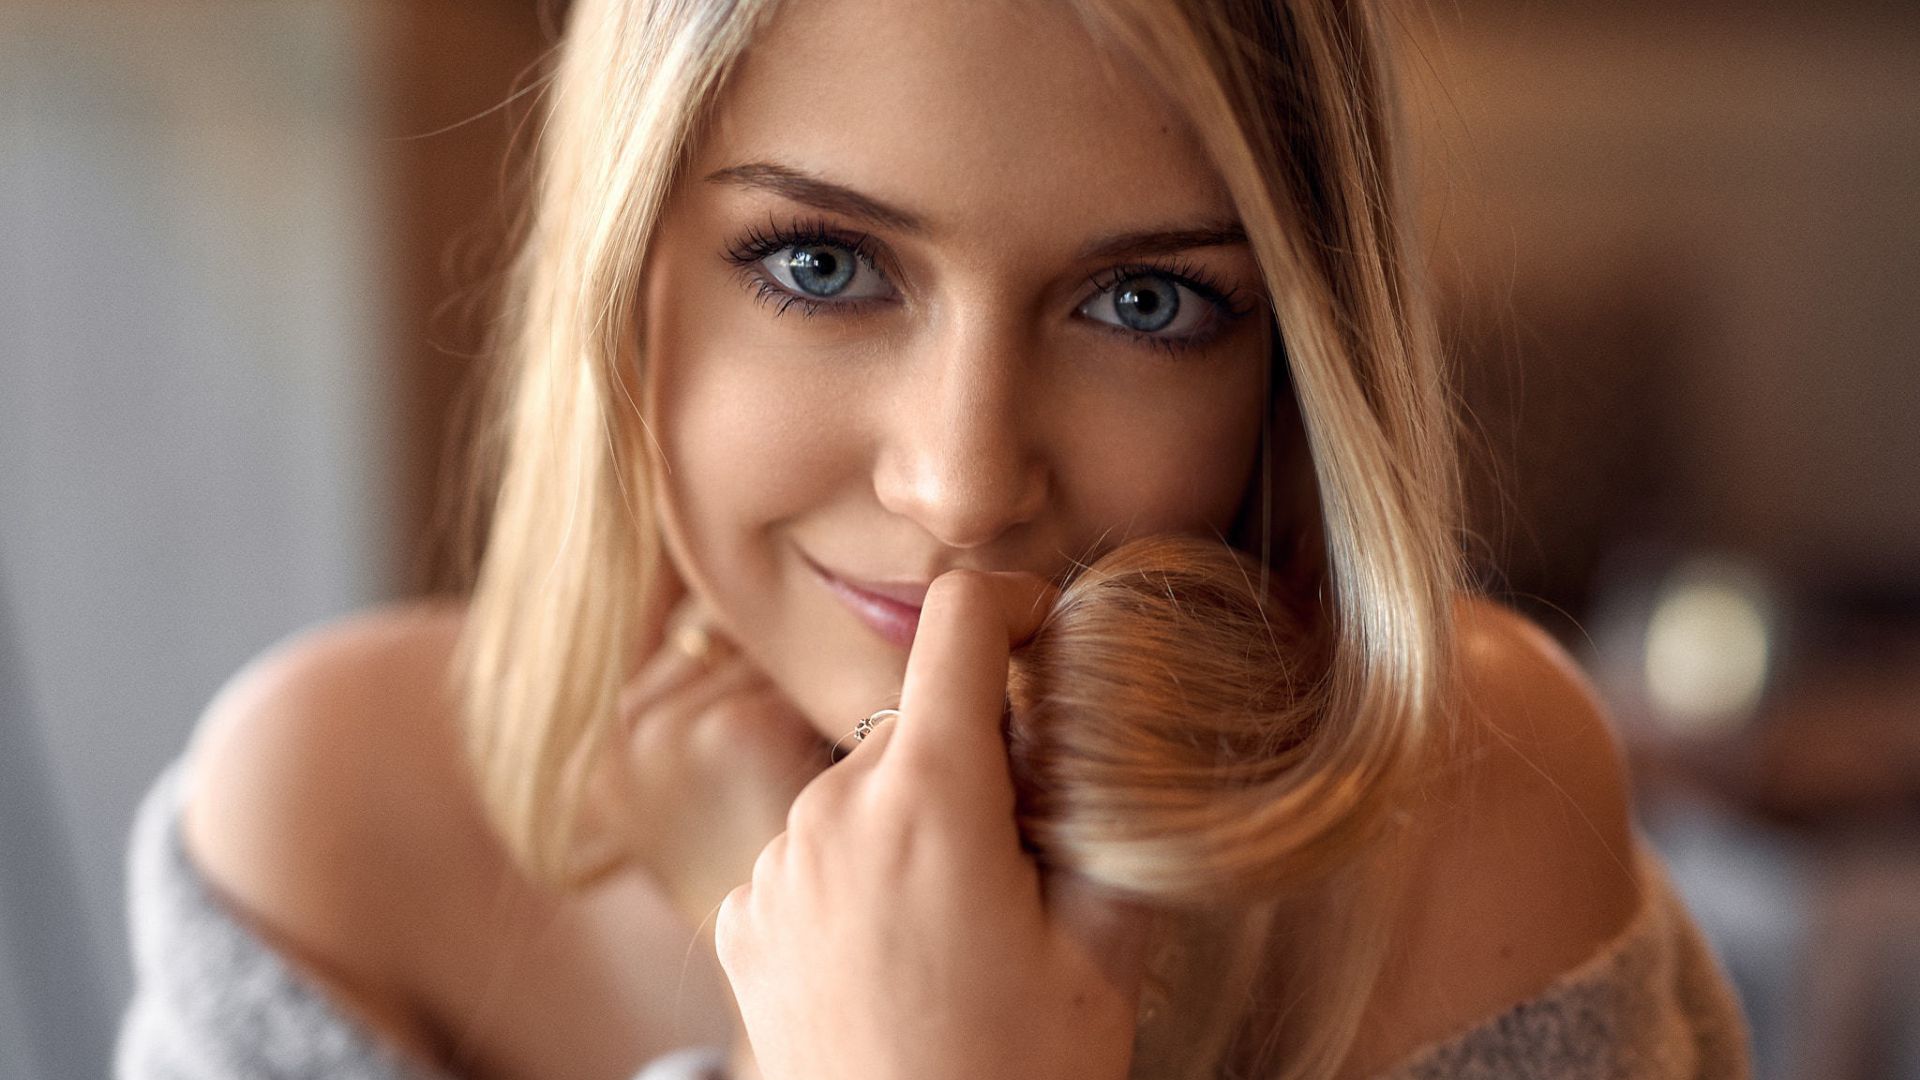 Download 1920x1080 wallpaper smile, blue eyes, beautiful, girl, full hd, hdtv, fhd, 1080p, 1920x1080 HD image, background, 2590